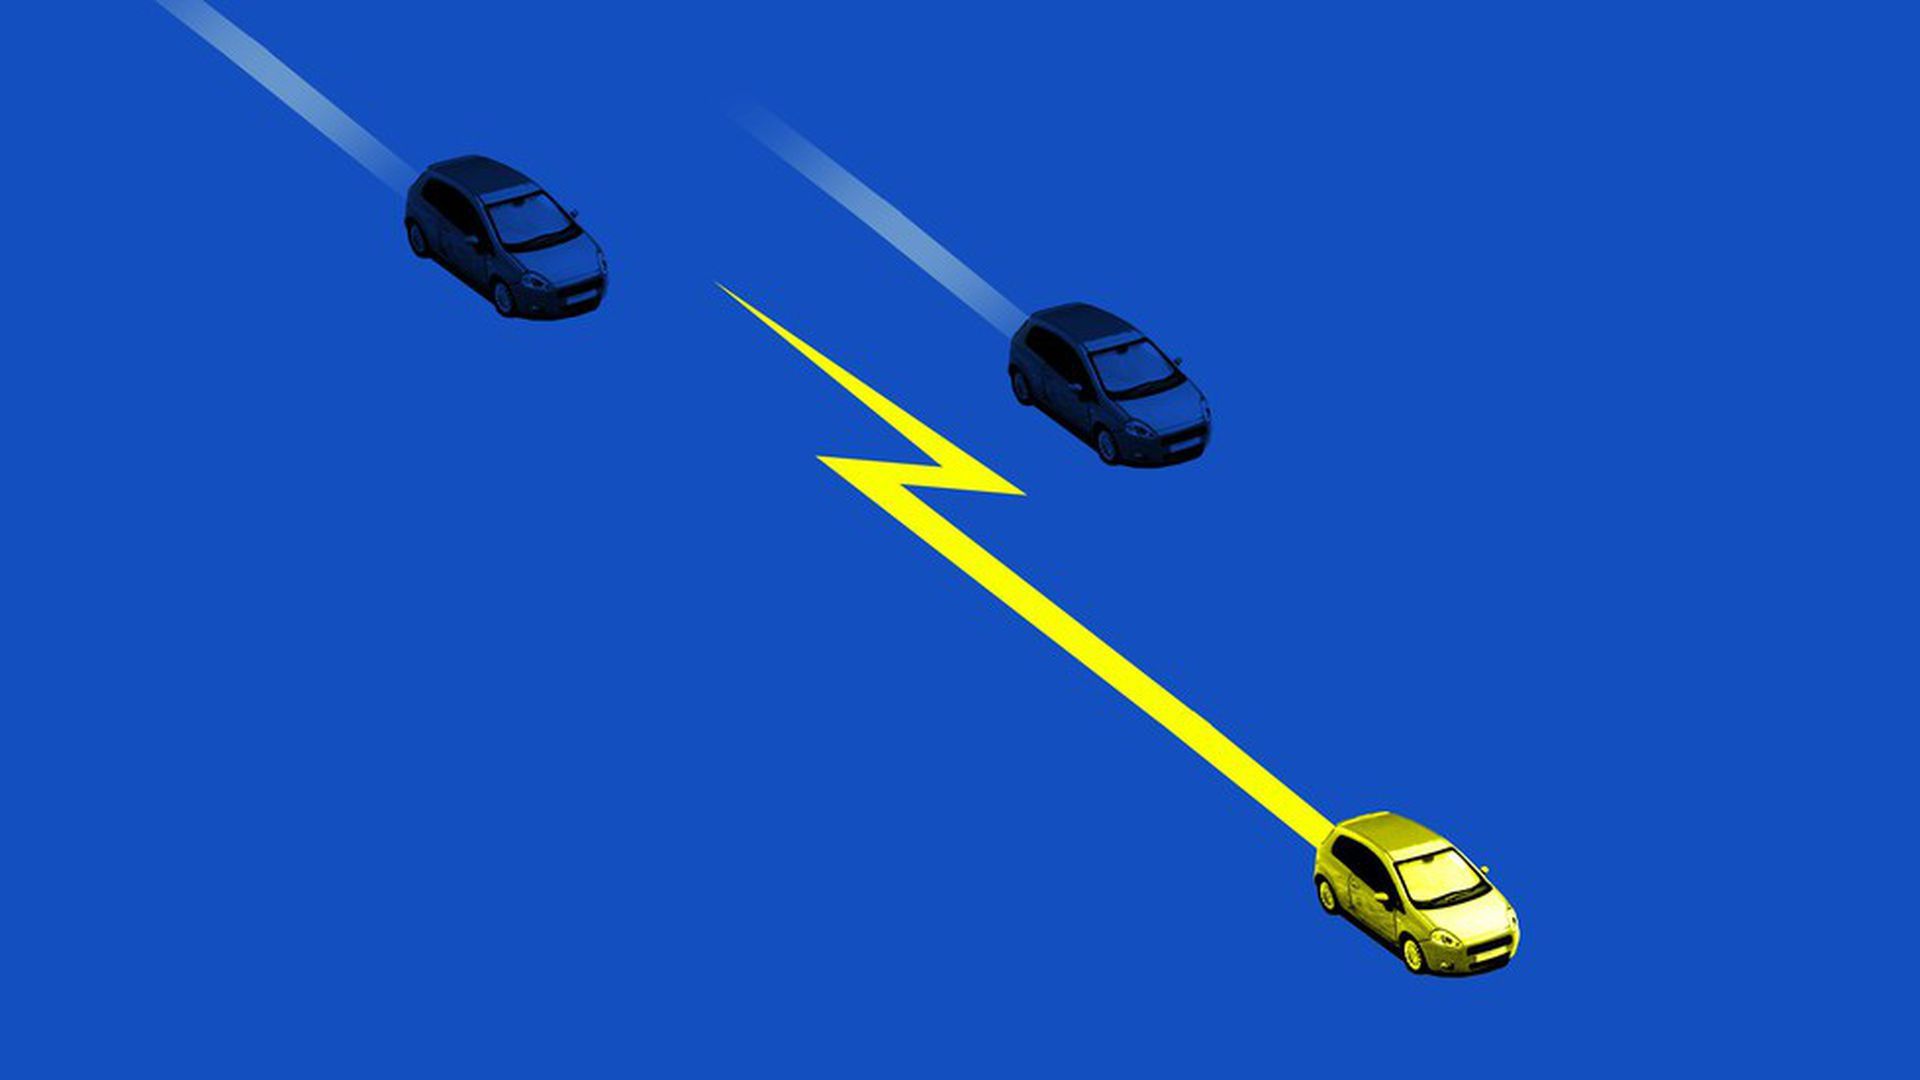 Illustration of three cars with one ahead of the other two.